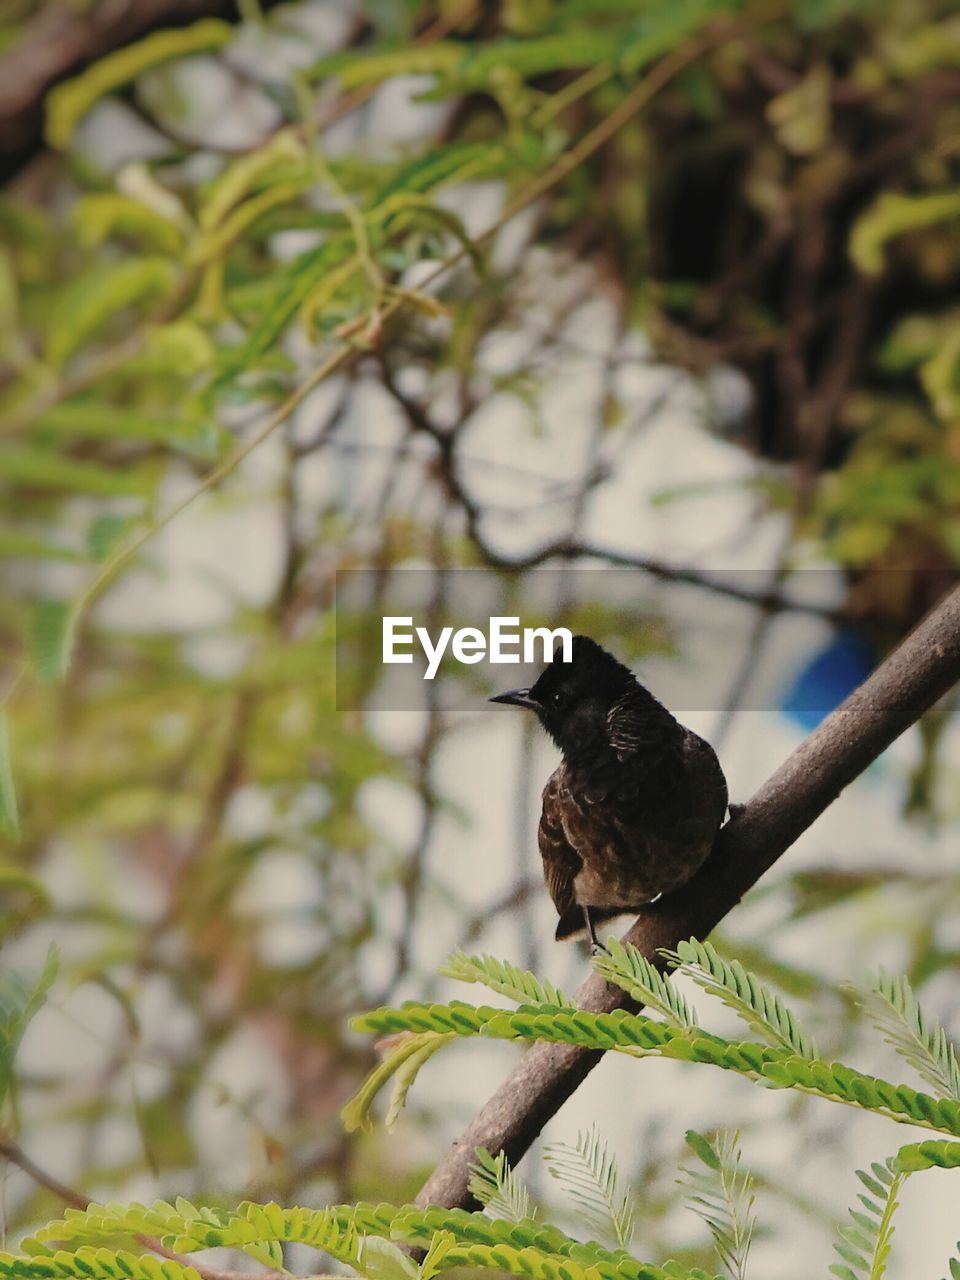 BIRD PERCHING ON TREE AGAINST BLURRED BACKGROUND